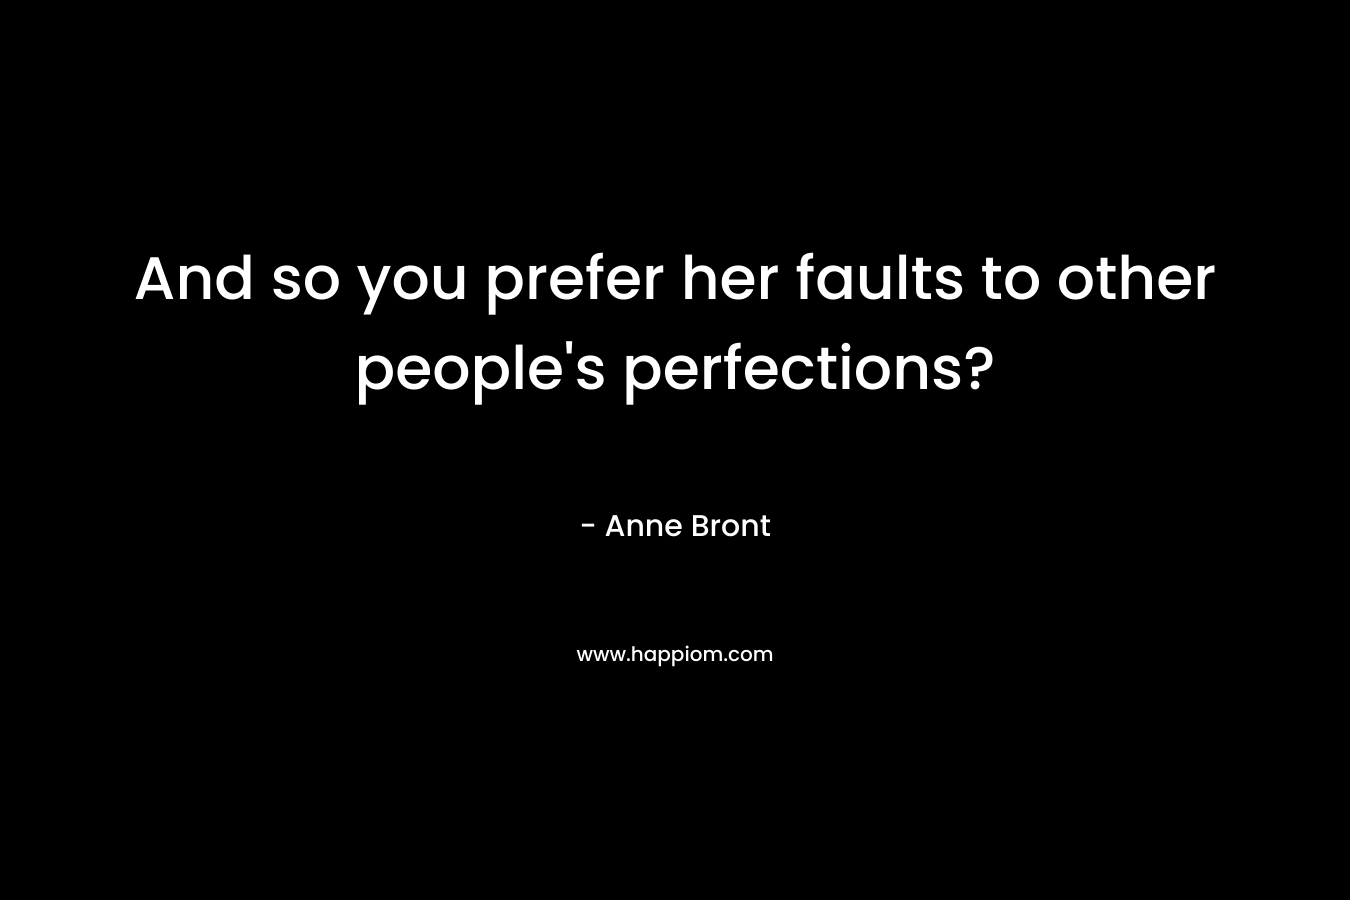 And so you prefer her faults to other people's perfections?